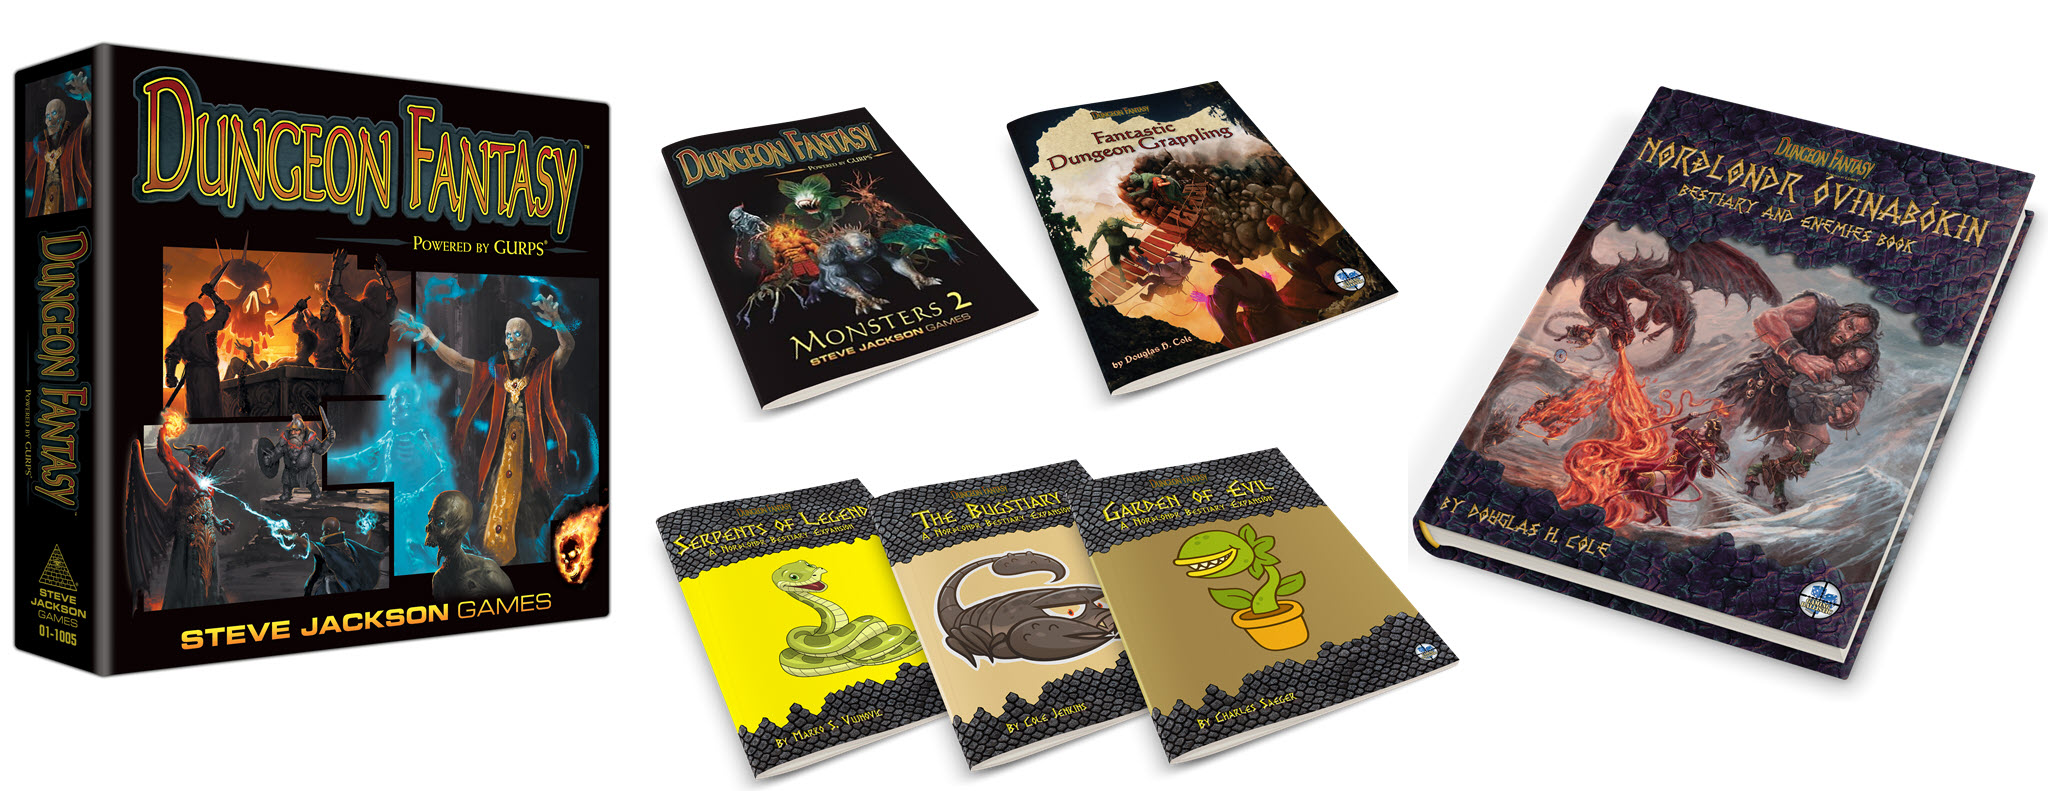 Boxed Set Bestiary and more Physical.jpg